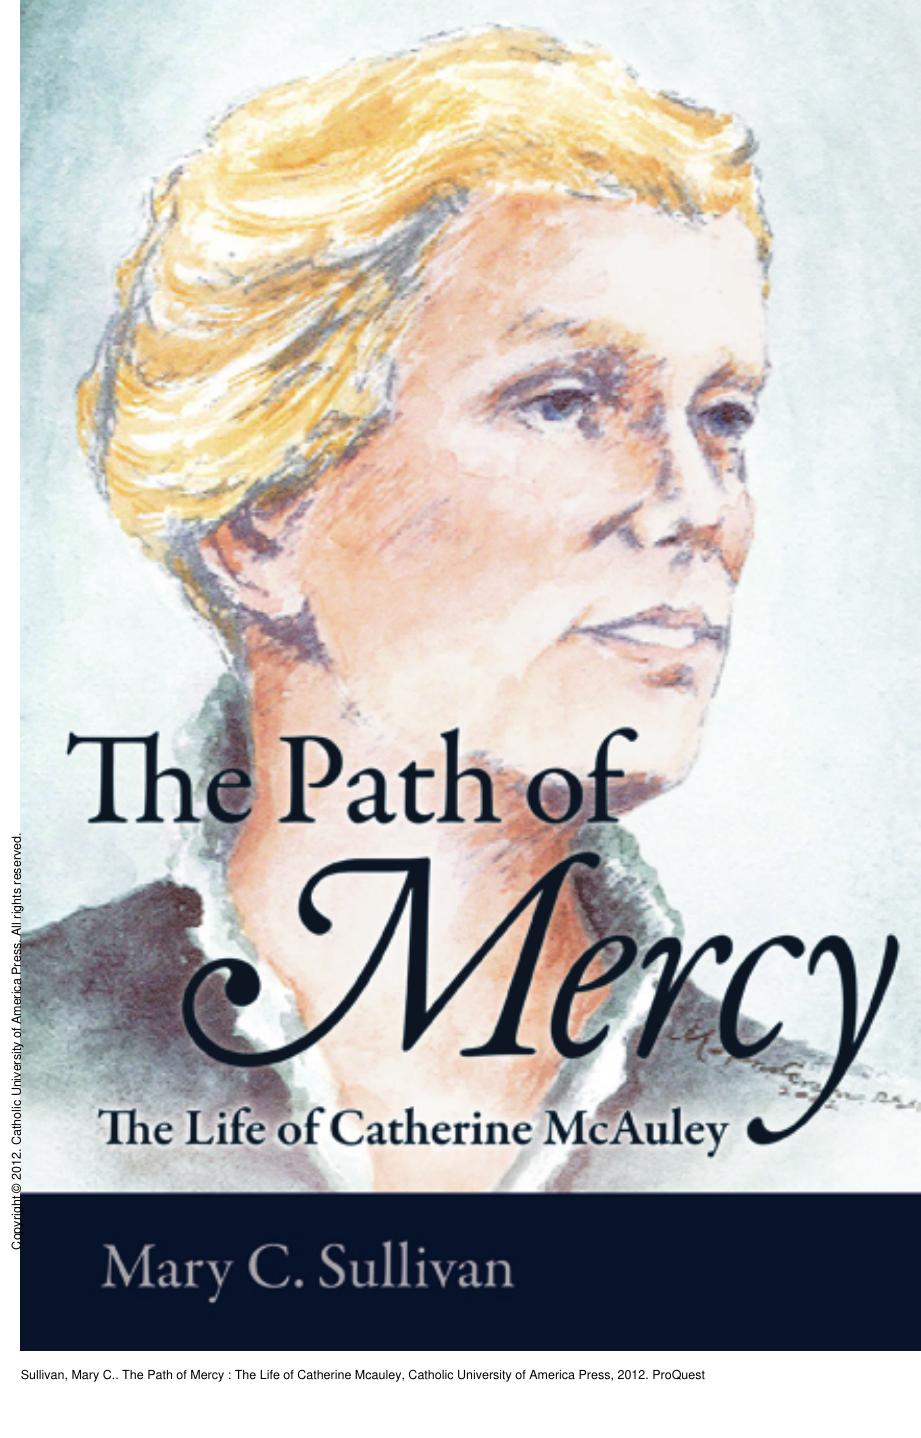 The Path of Mercy : The Life of Catherine Mcauley by Mary C. Sullivan